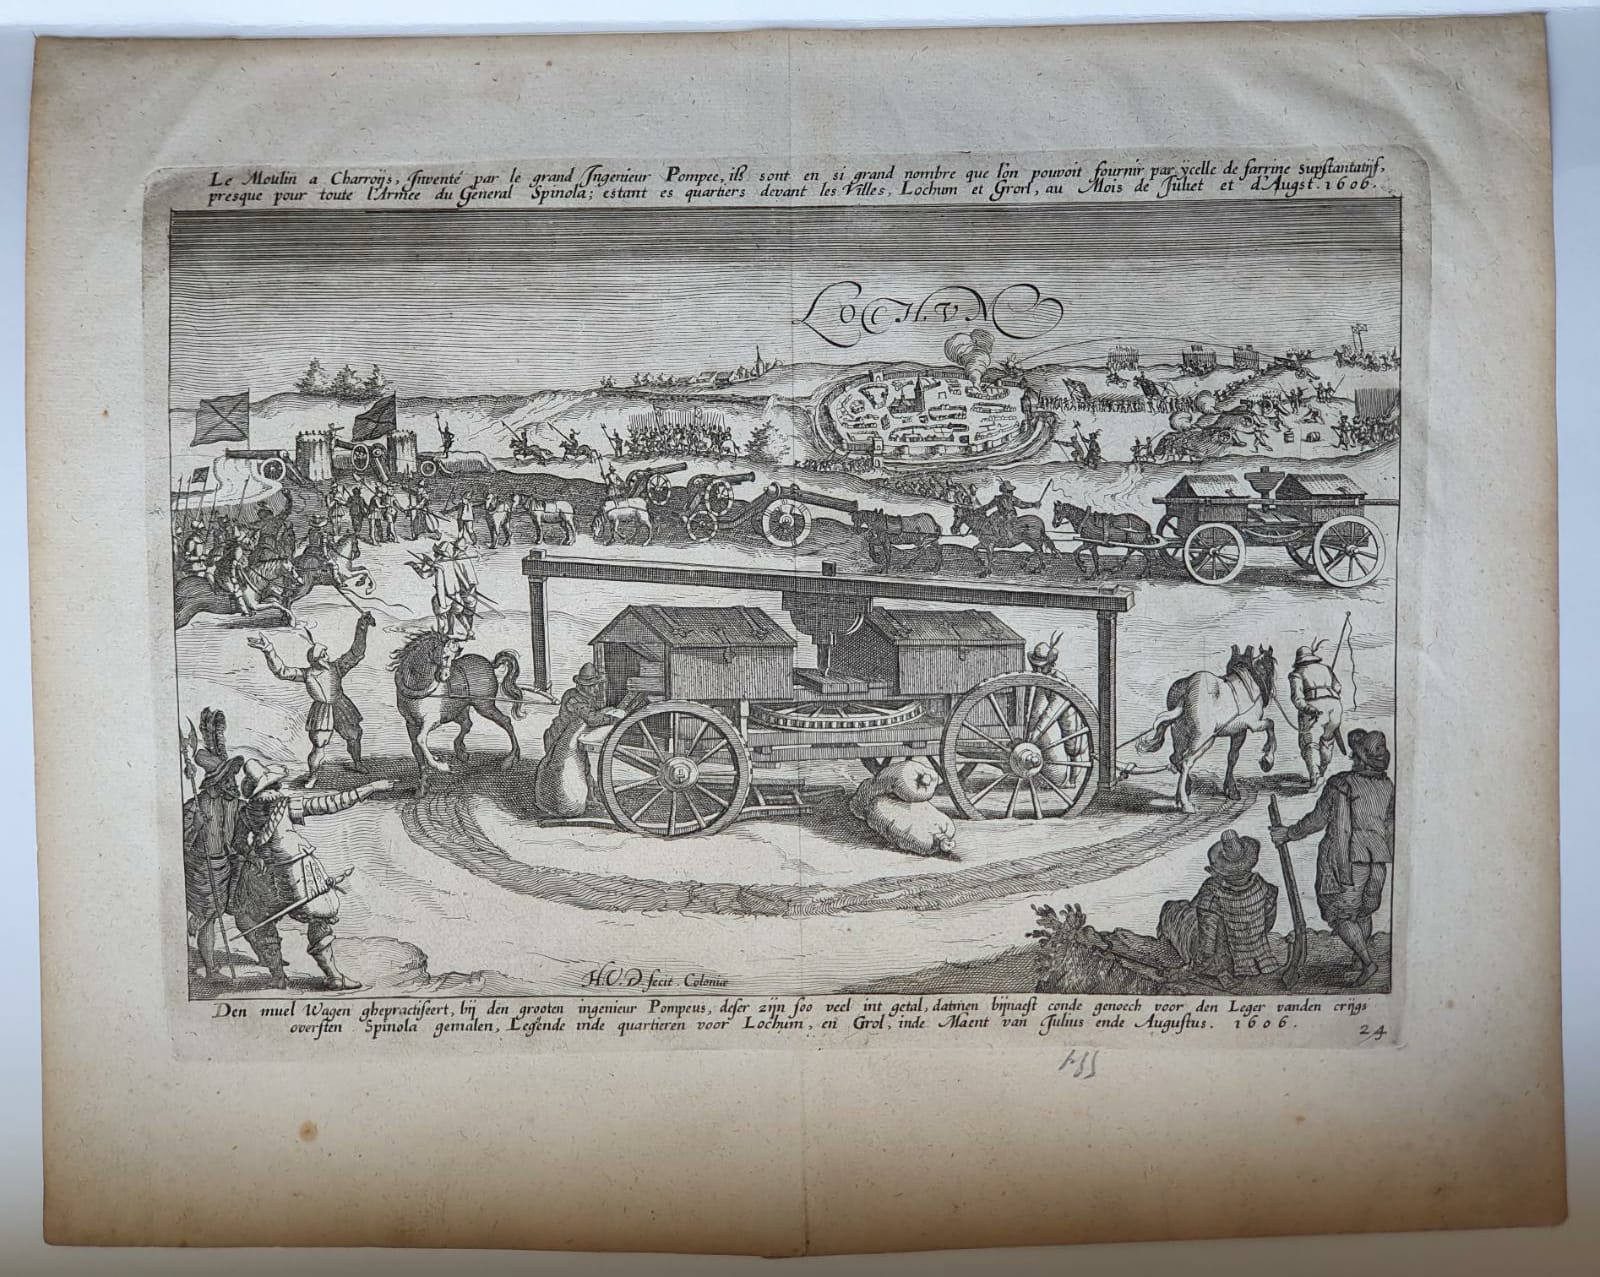 [Antique etching and engraving, ets en gravure, print] Monogrammist HVD, Capture of Lochem by Spinola and the flour carts in his army in 1606, published before 1650.